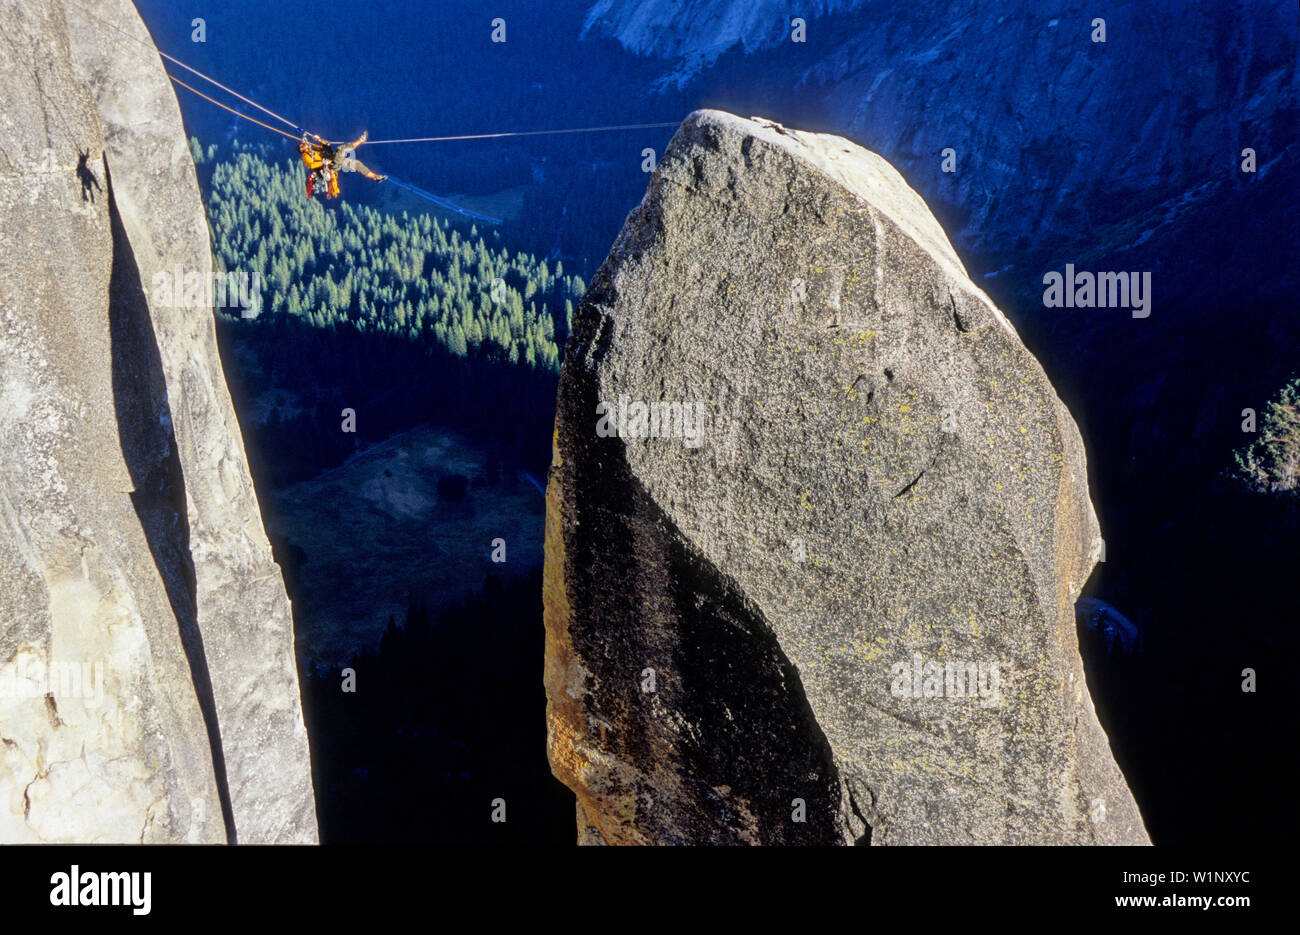 Tyrolienne, Big Wall Klettern, Lost Arrow Spire, Yosemite Valley, California, USA Banque D'Images